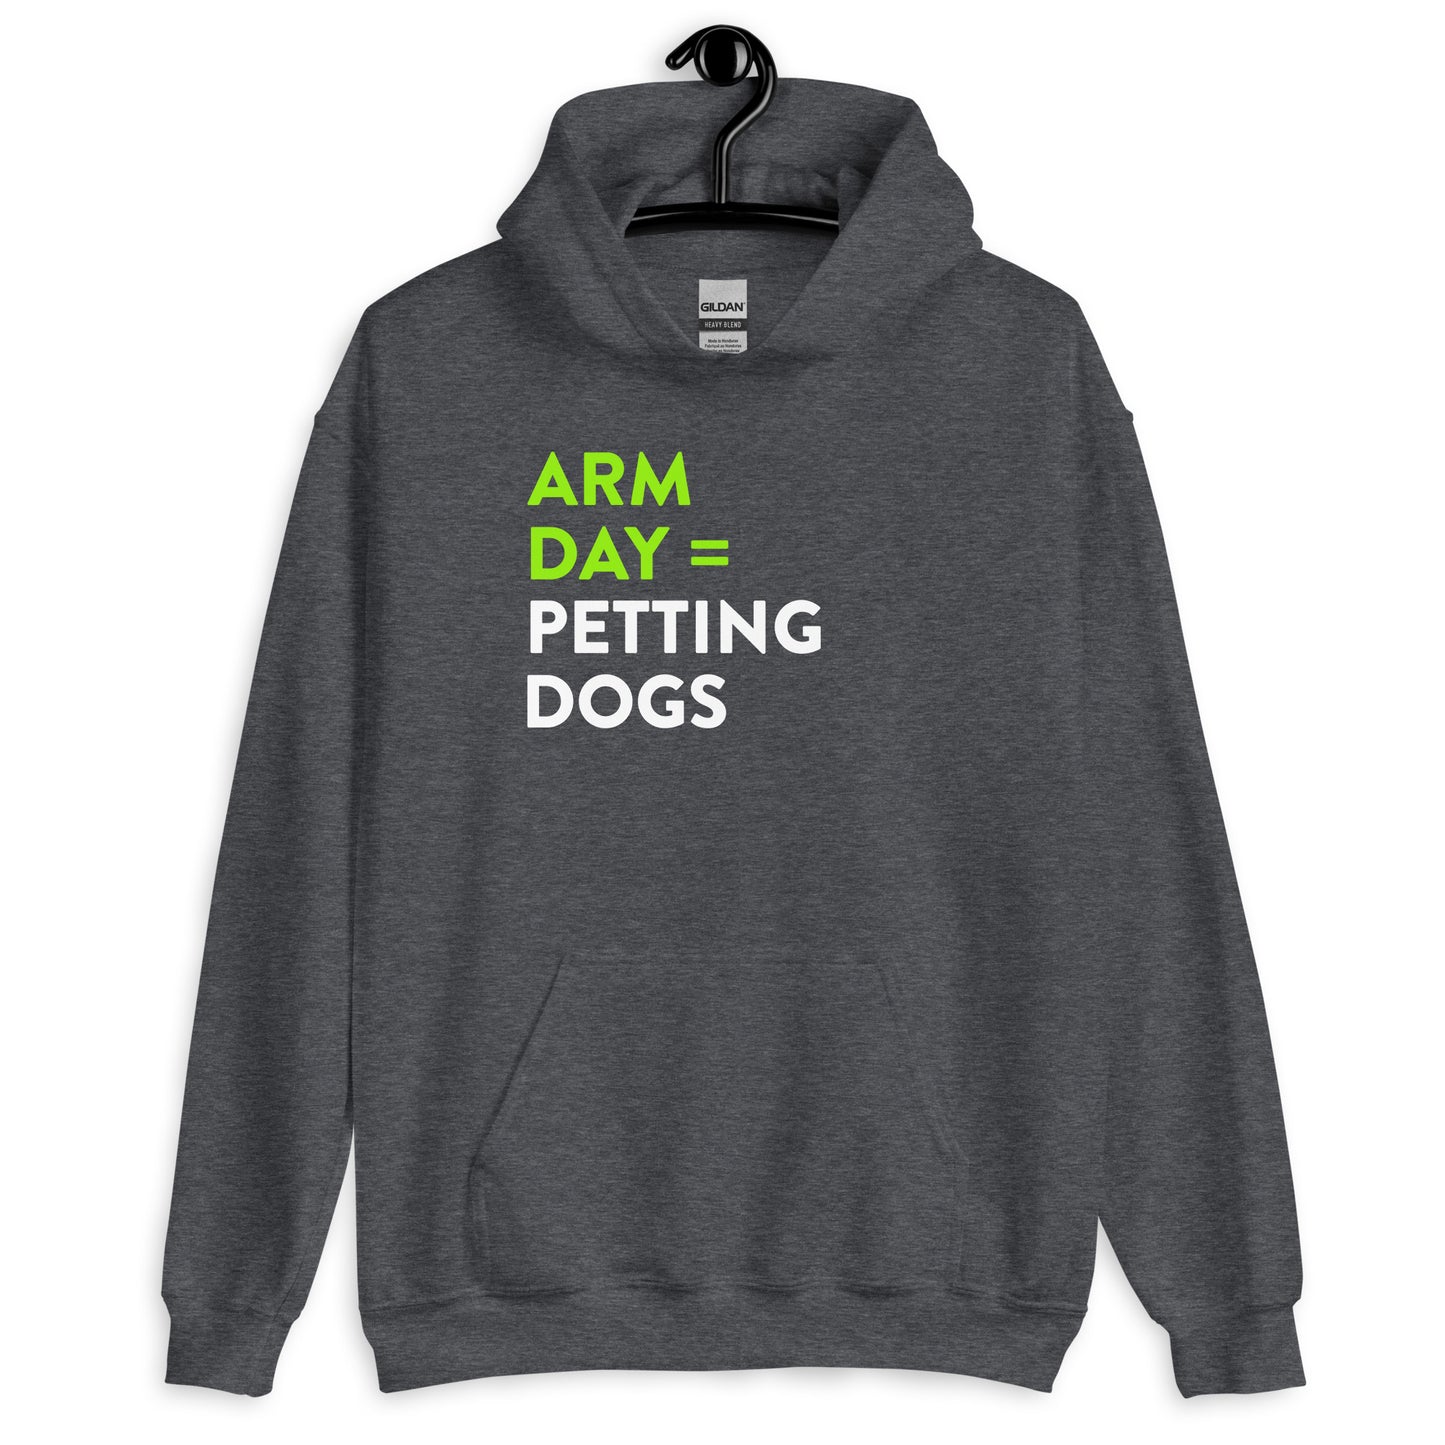 Arm Day = Petting Dogs Unisex Hoodie